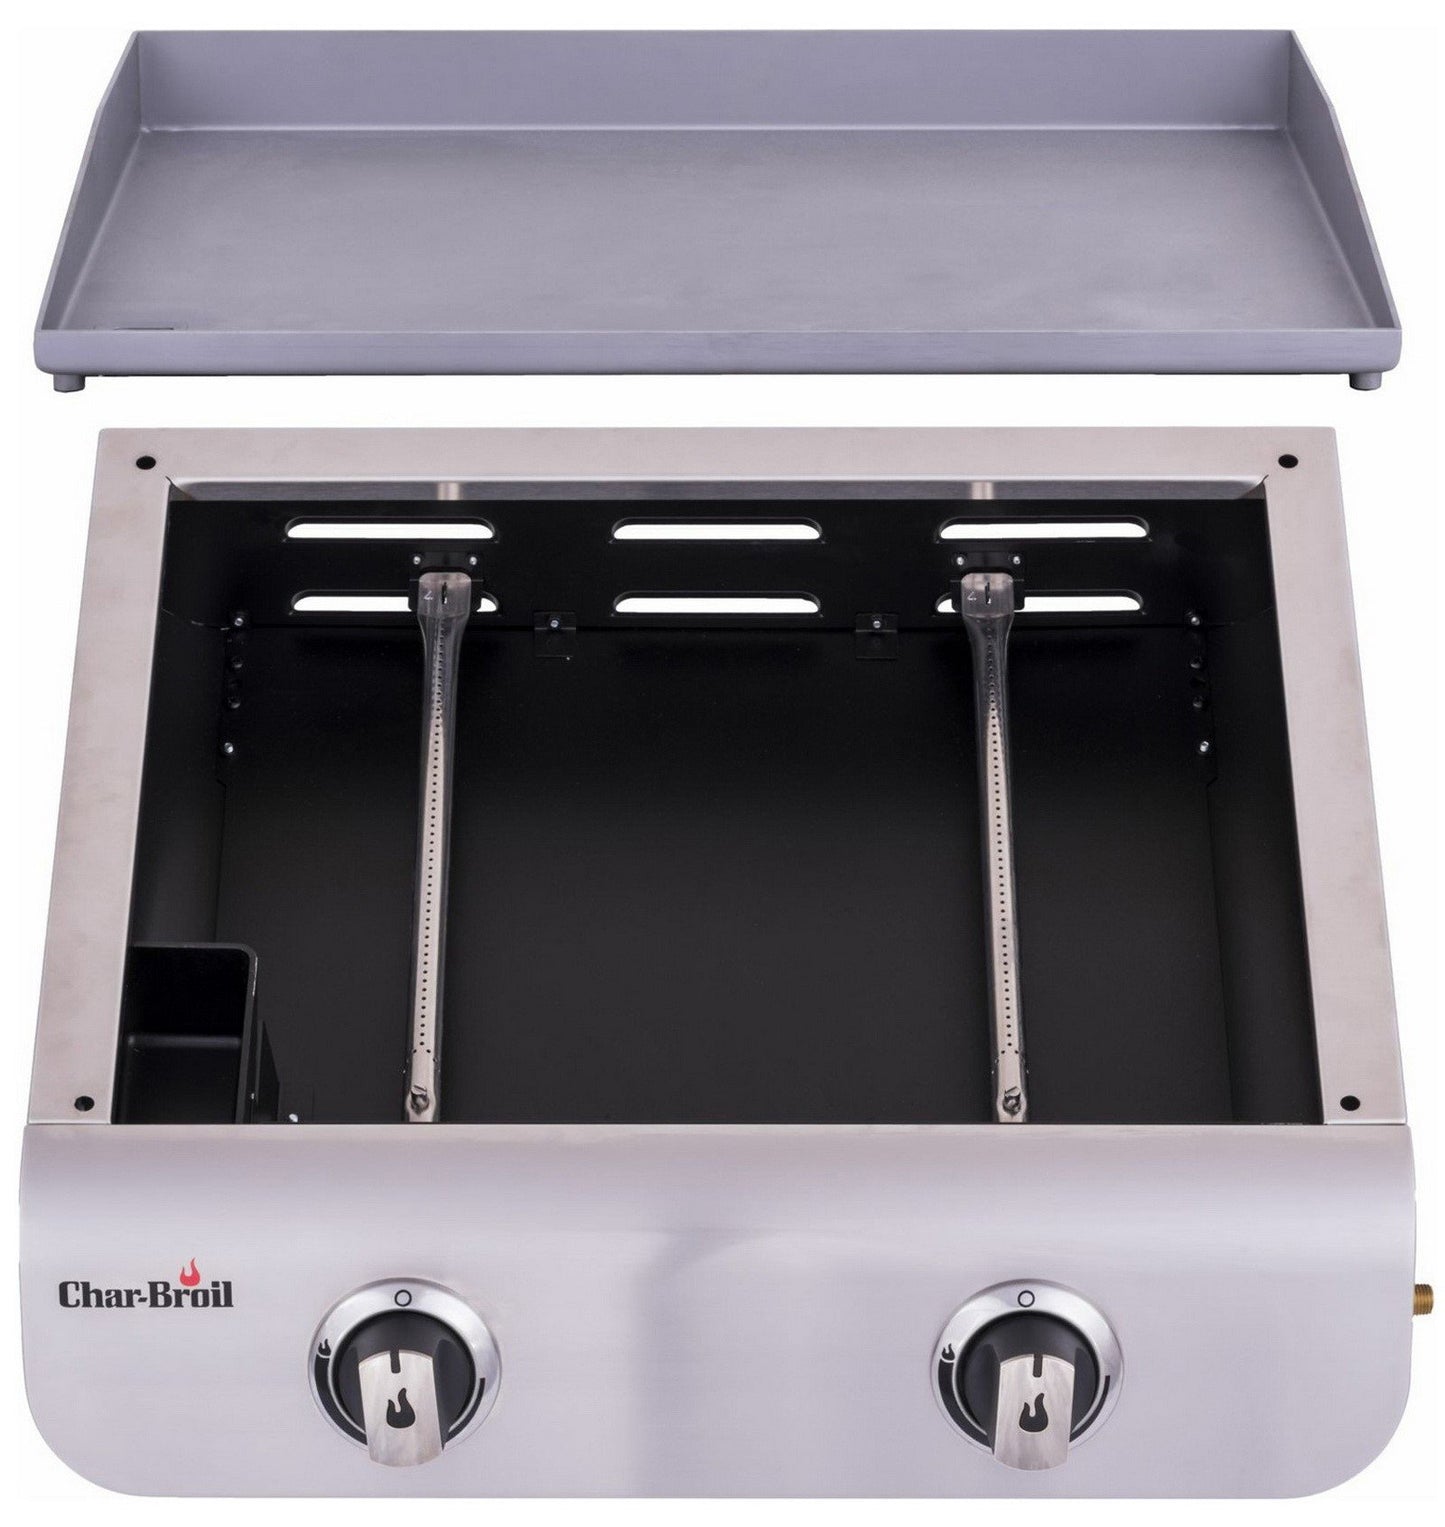 Char-Broil 2-Burner Propane Outdoor Stainless Steel Portable Tabletop Griddle